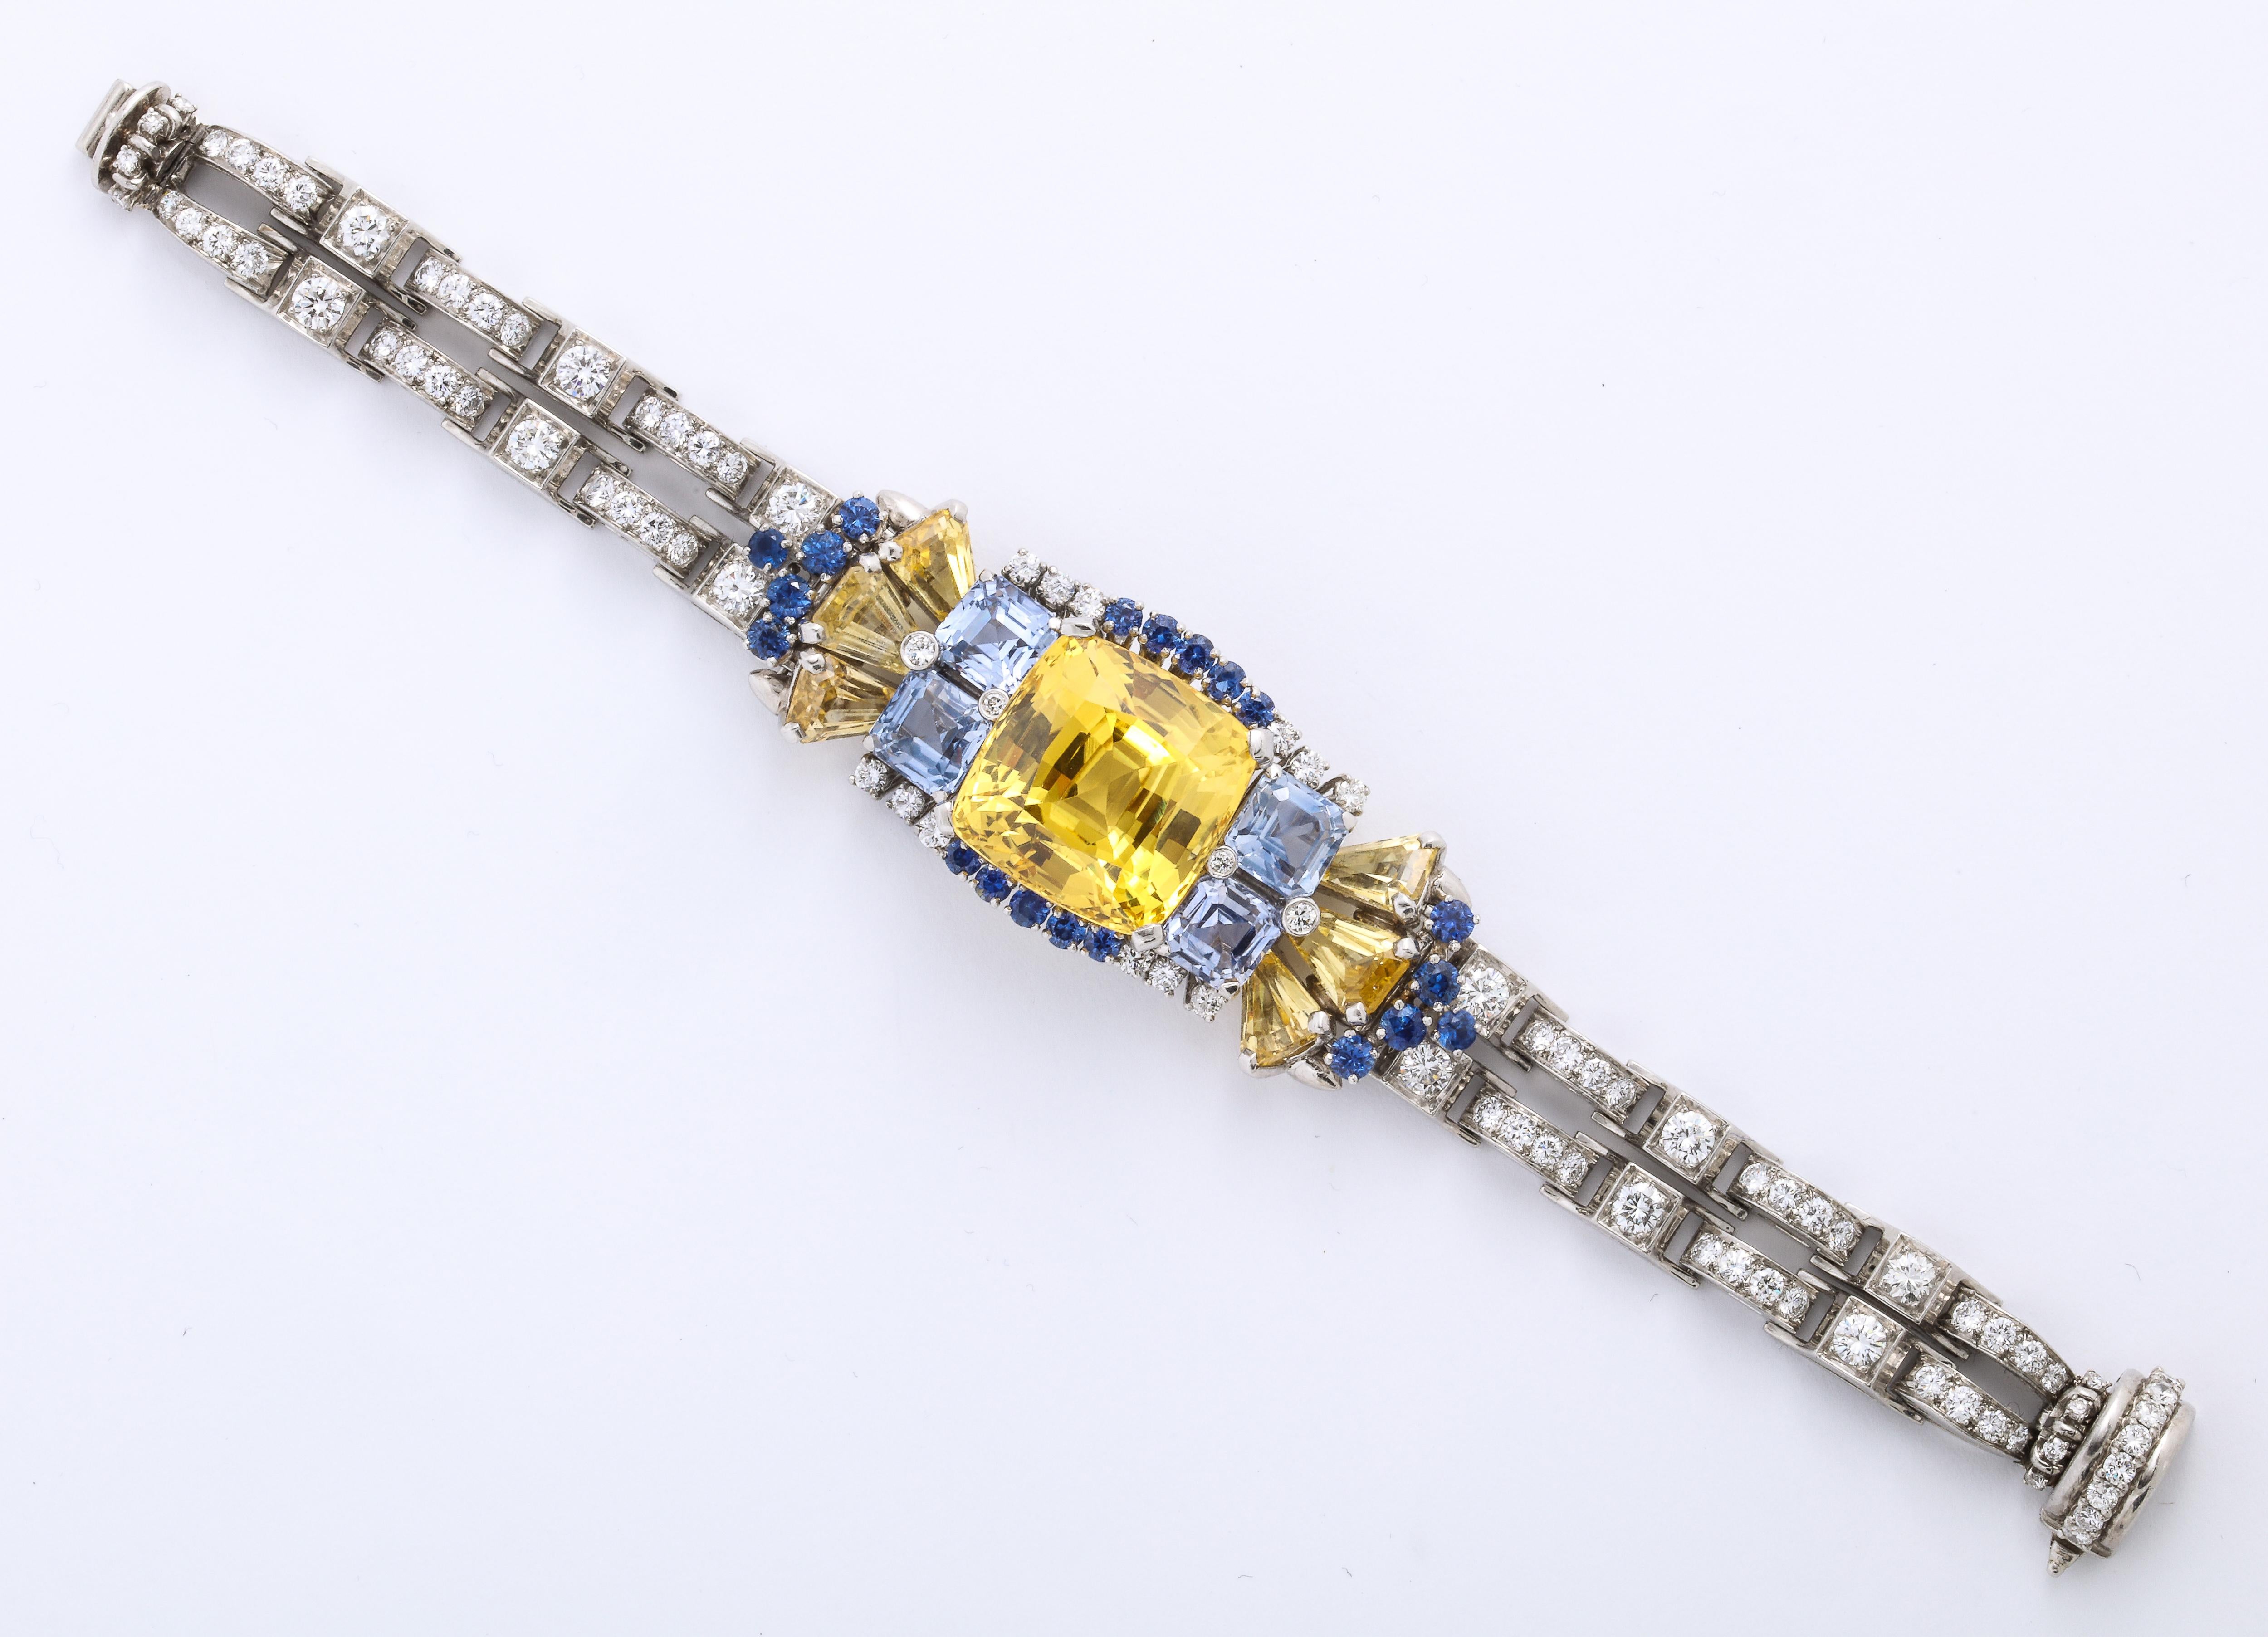 Over the top exquisite one of a kind original Authentic Oscar Heyman Bros Diamond, Platinum bracelet; with an Unheated 41.47 Carat yellow Sapphire center stone 


Oscar Heyman & Bros Platinum Bracelet 
Total wight 73 Grams 
Yellow Sapphire 41.47